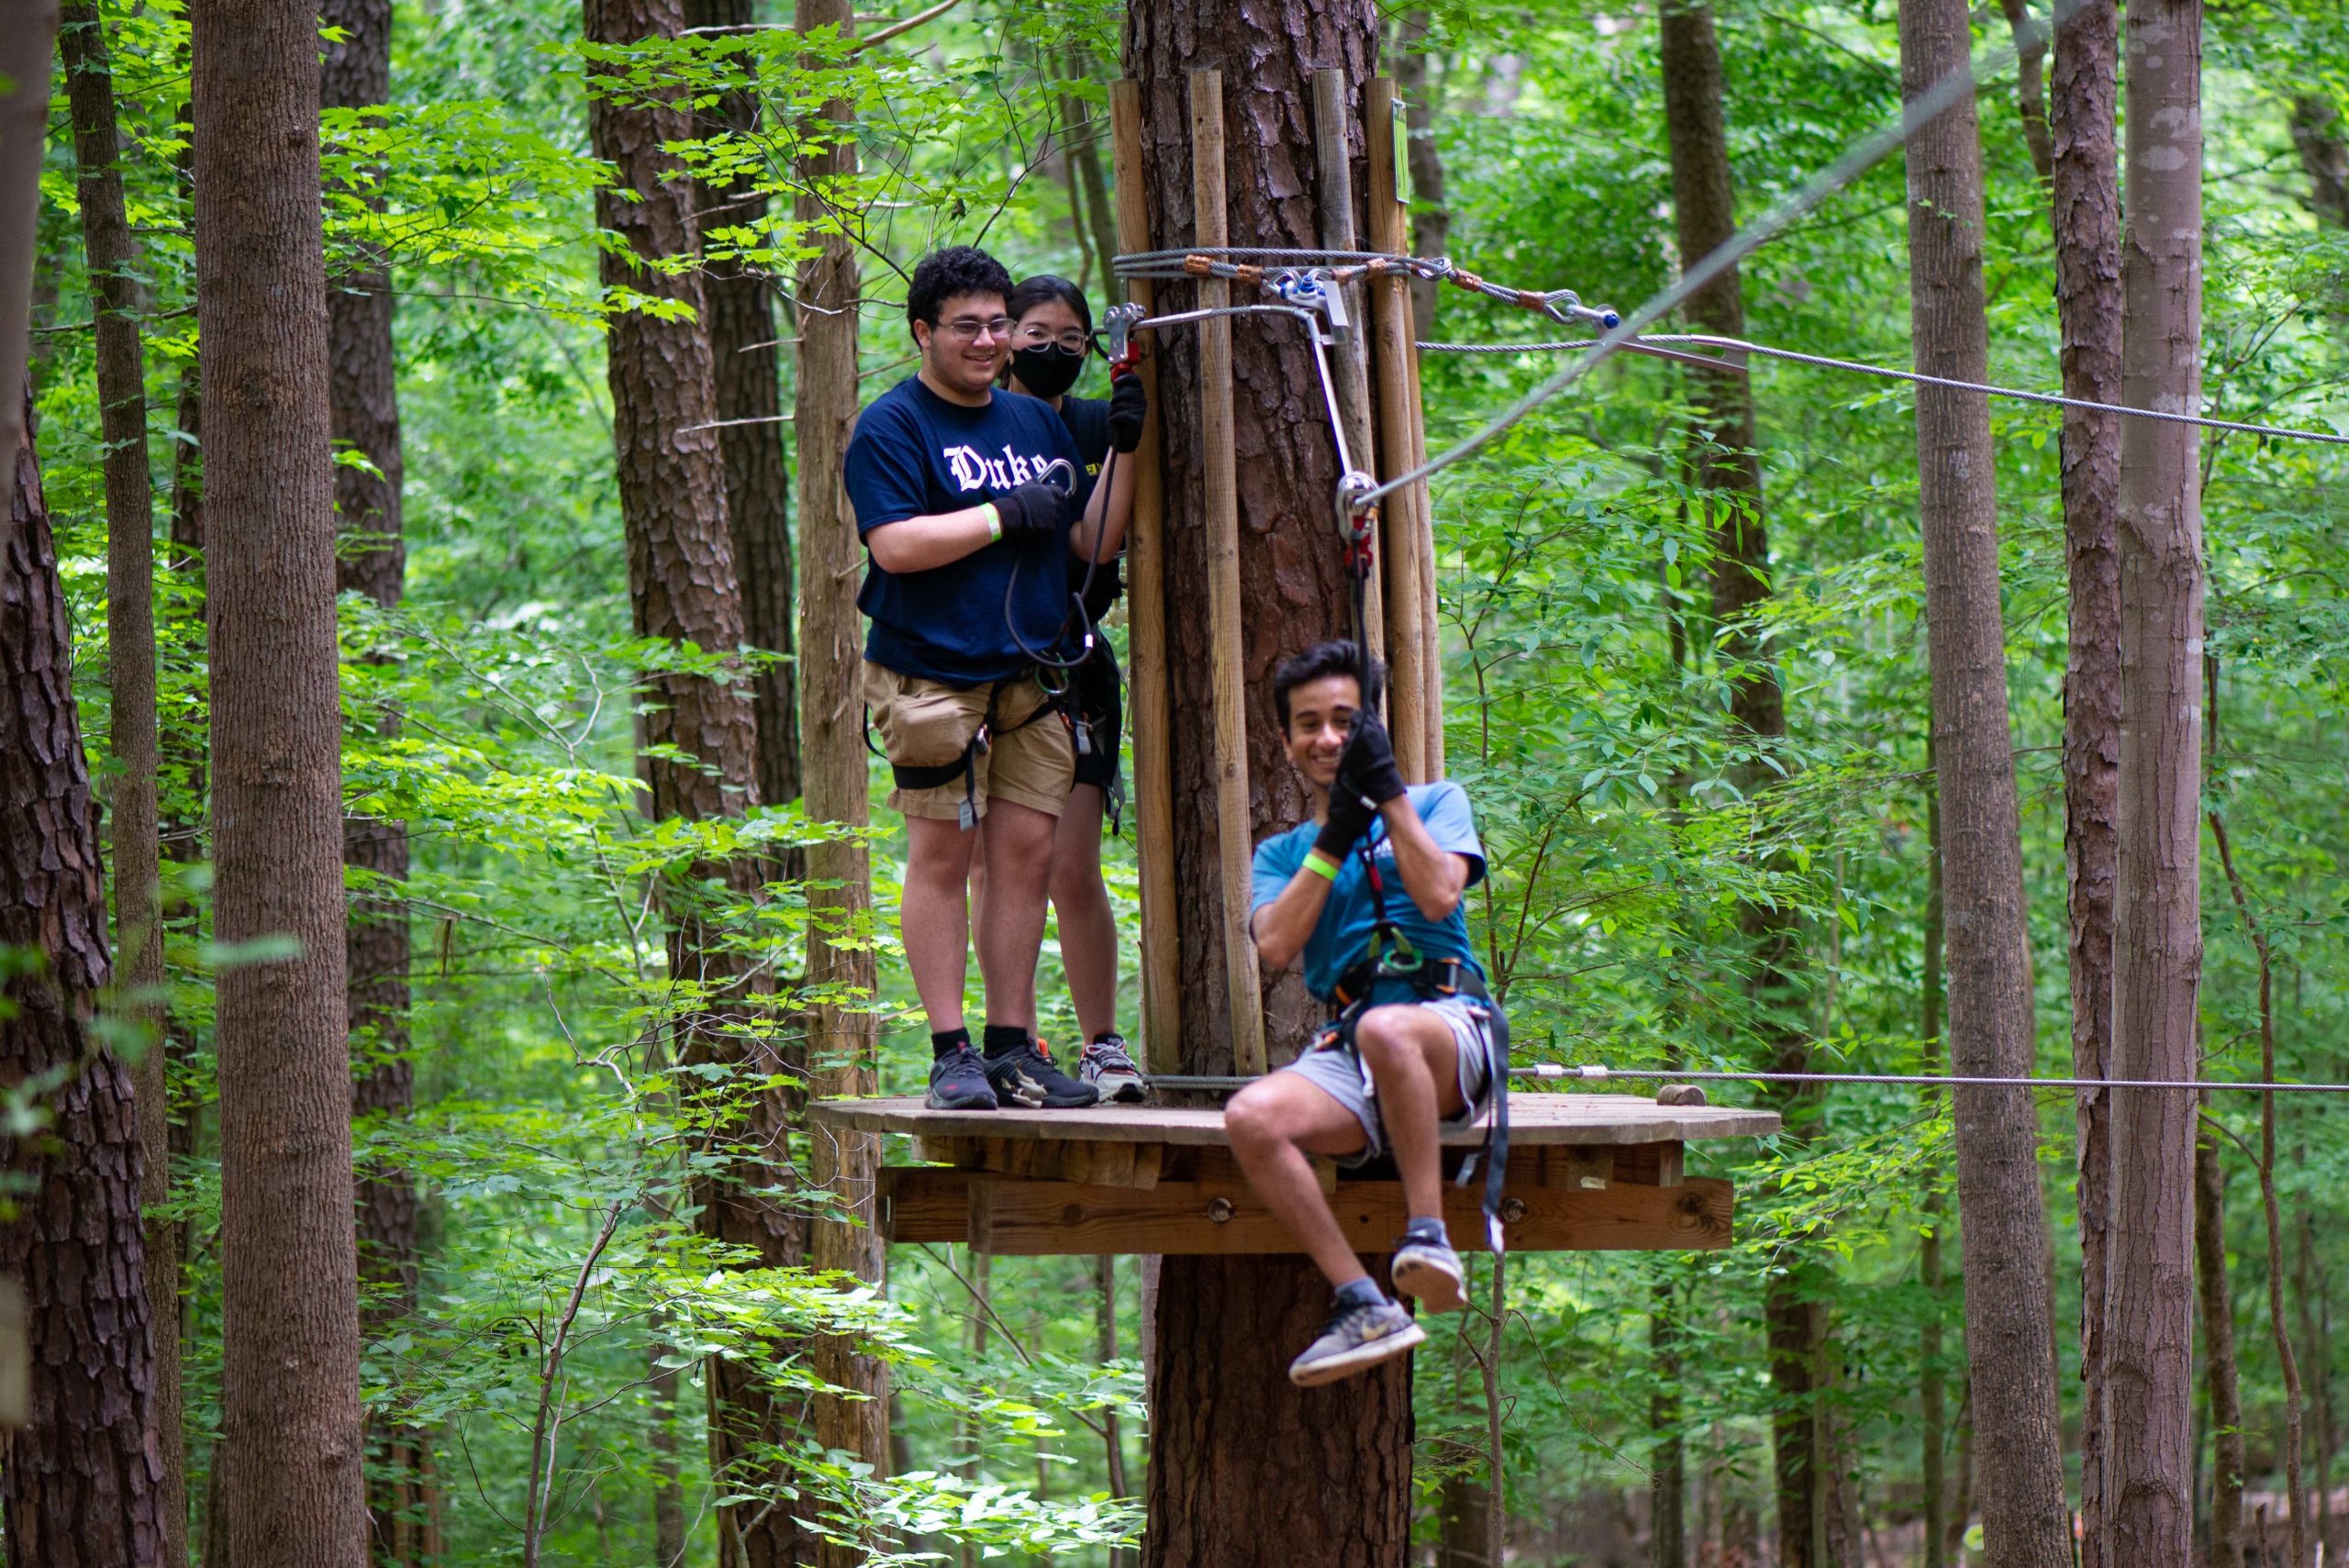 Huang Fellows tackle a ropes course together